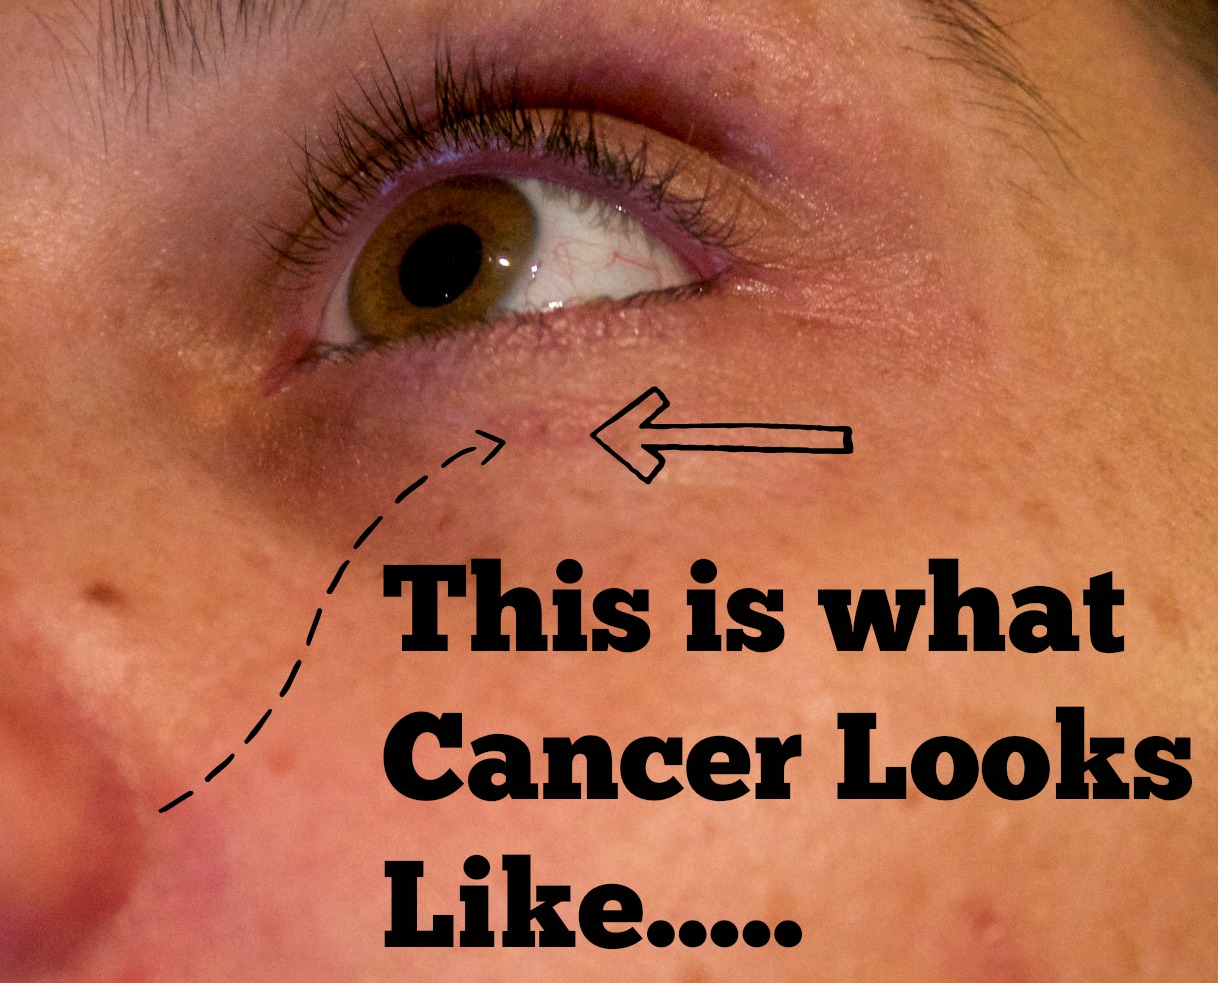 What Does Skin Cancer Look Likebasal Cancer Cinemax